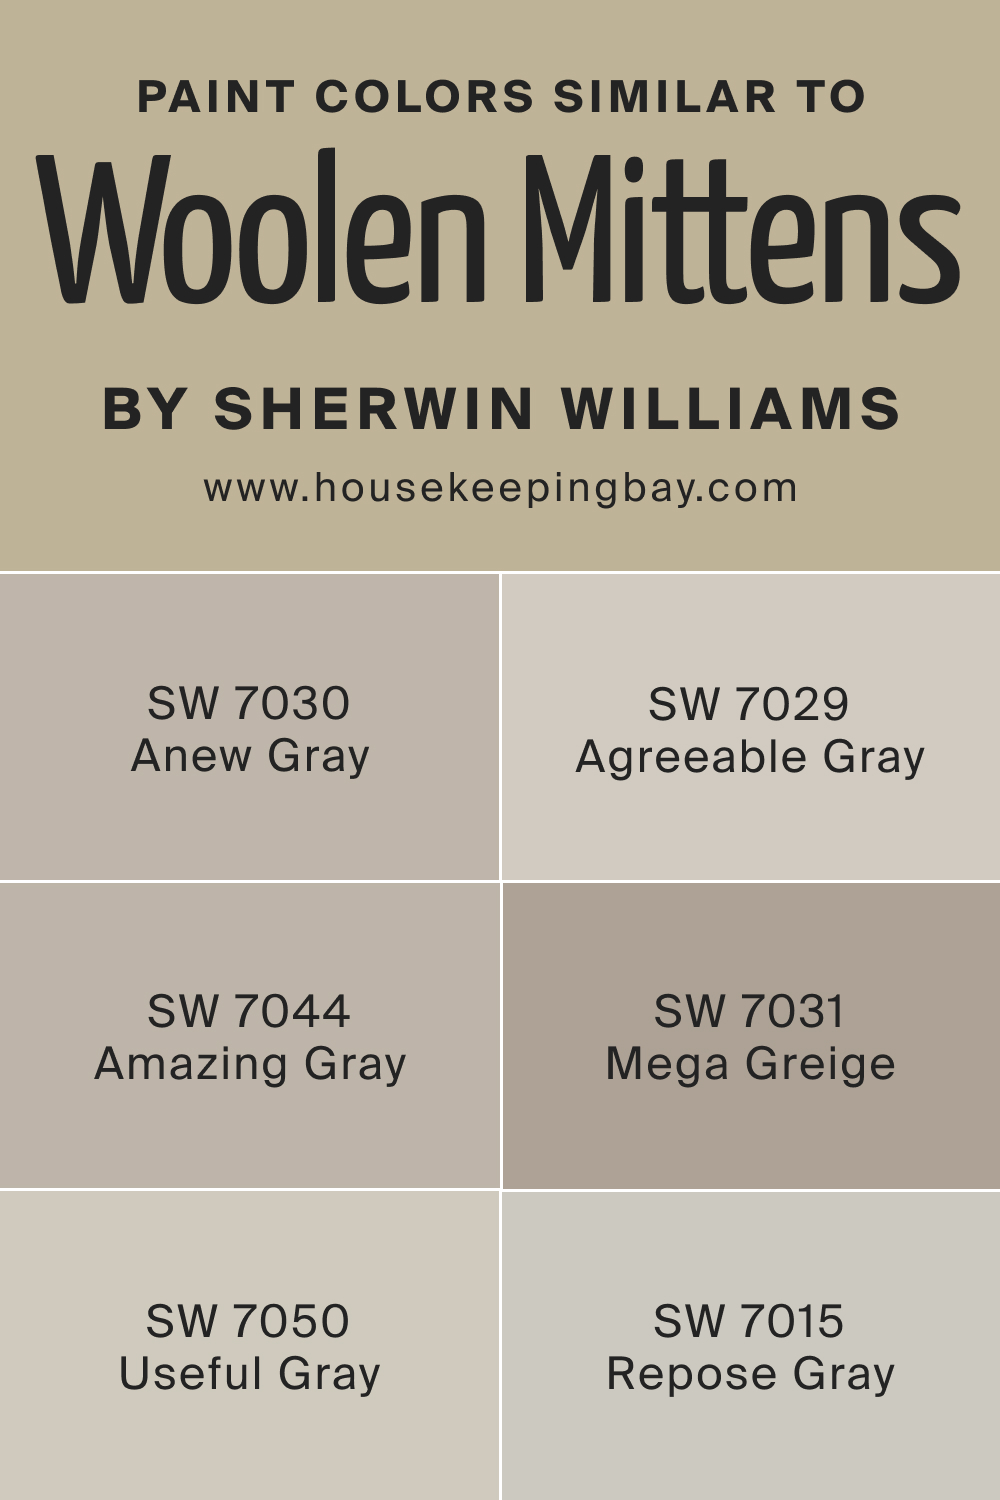 Paint Color Similar to SW 9526 Woolen Mittens by Sherwin Williams